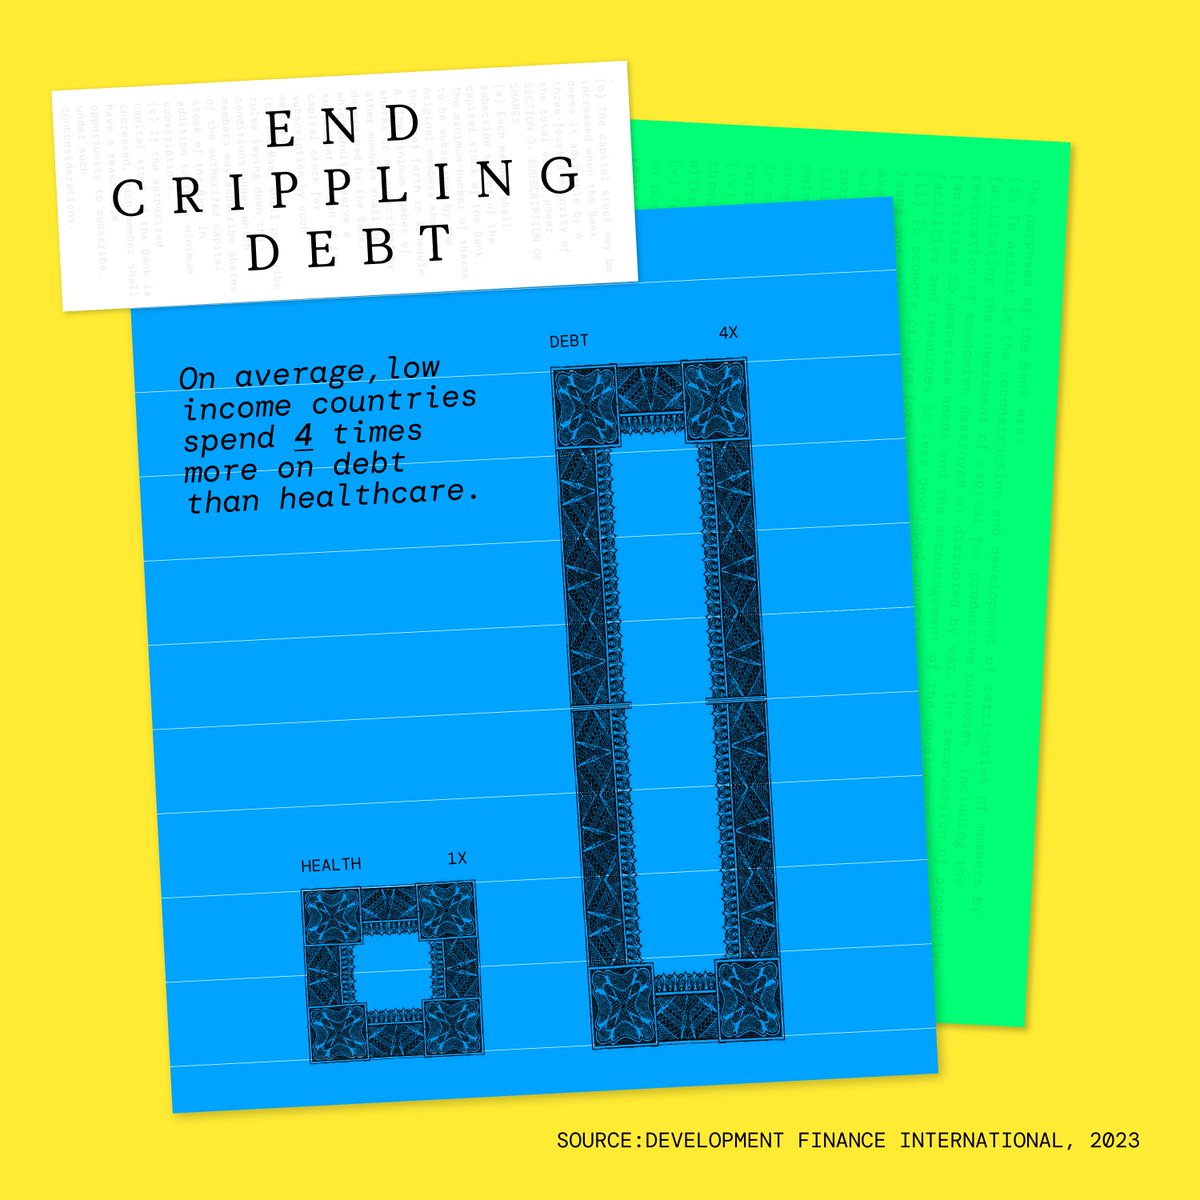 The global financial system needs an upgrade. #G20 Leaders must act: Triple Investment. End Crippling Debt. Make Polluters Pay. Read and share the letter to G20 Leaders at globalgoals.org/dearG20 #DearG20